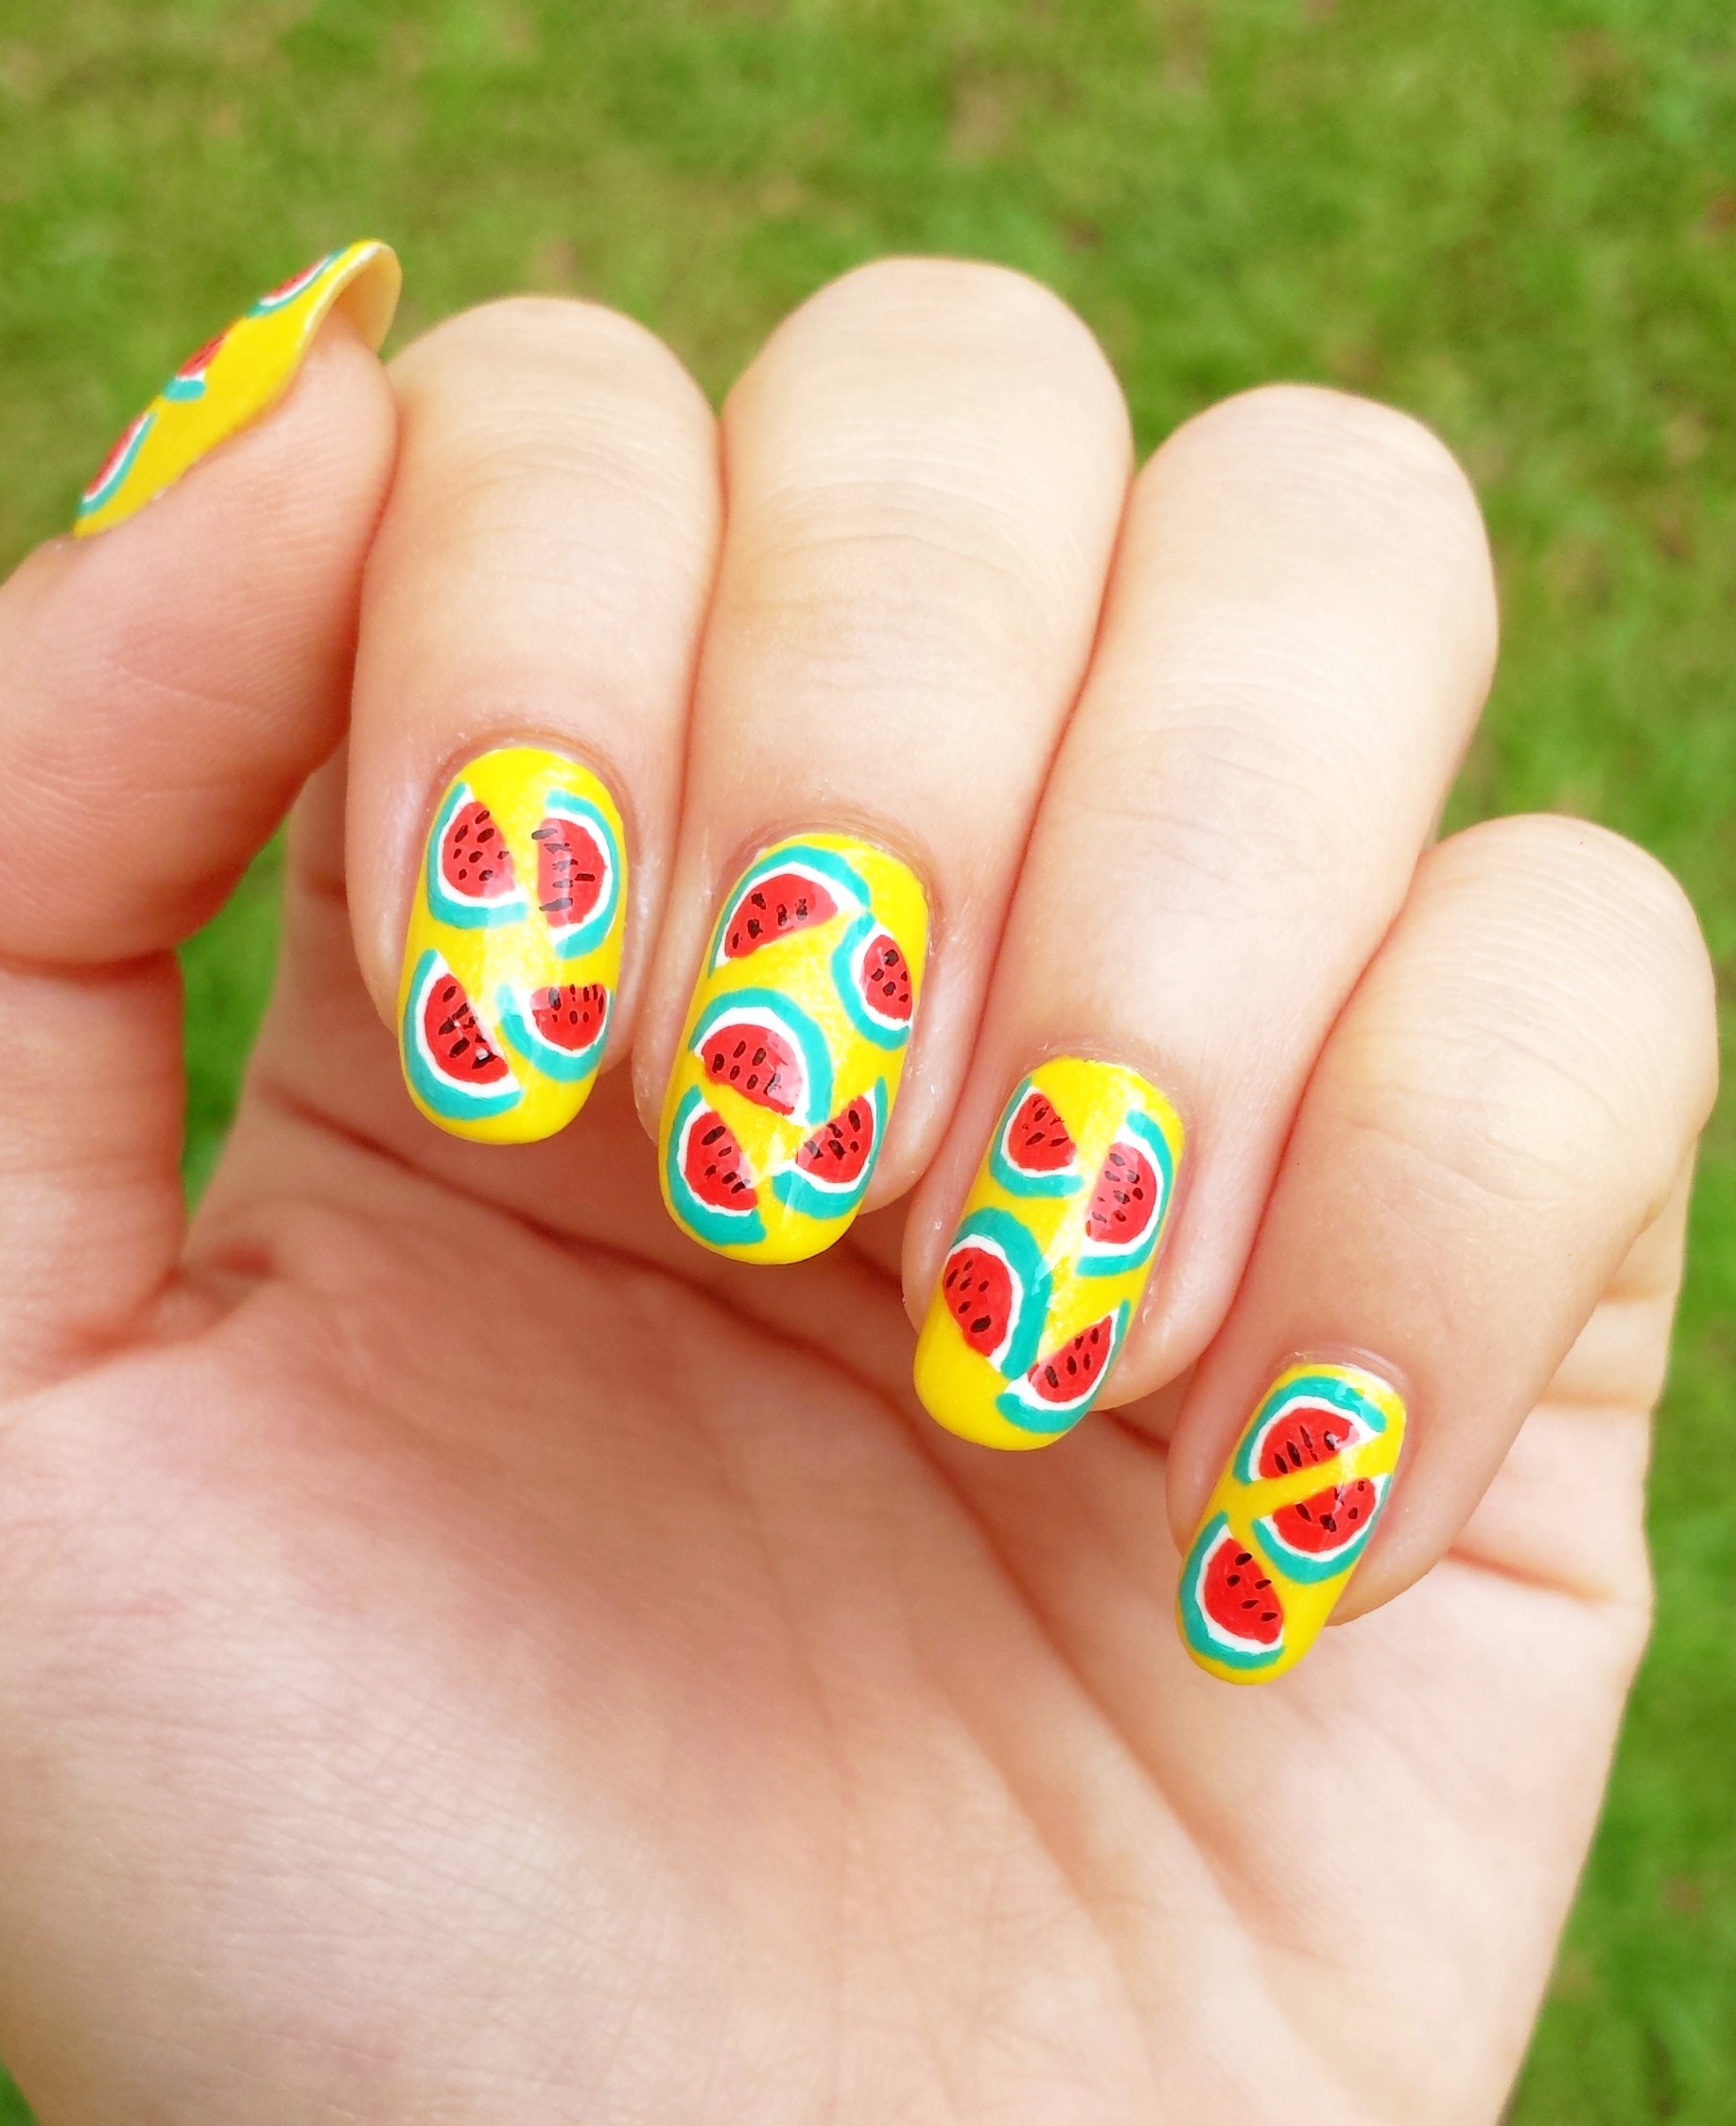 How Many Nails? (Watermelon) | Color street nails, Color street, Street game